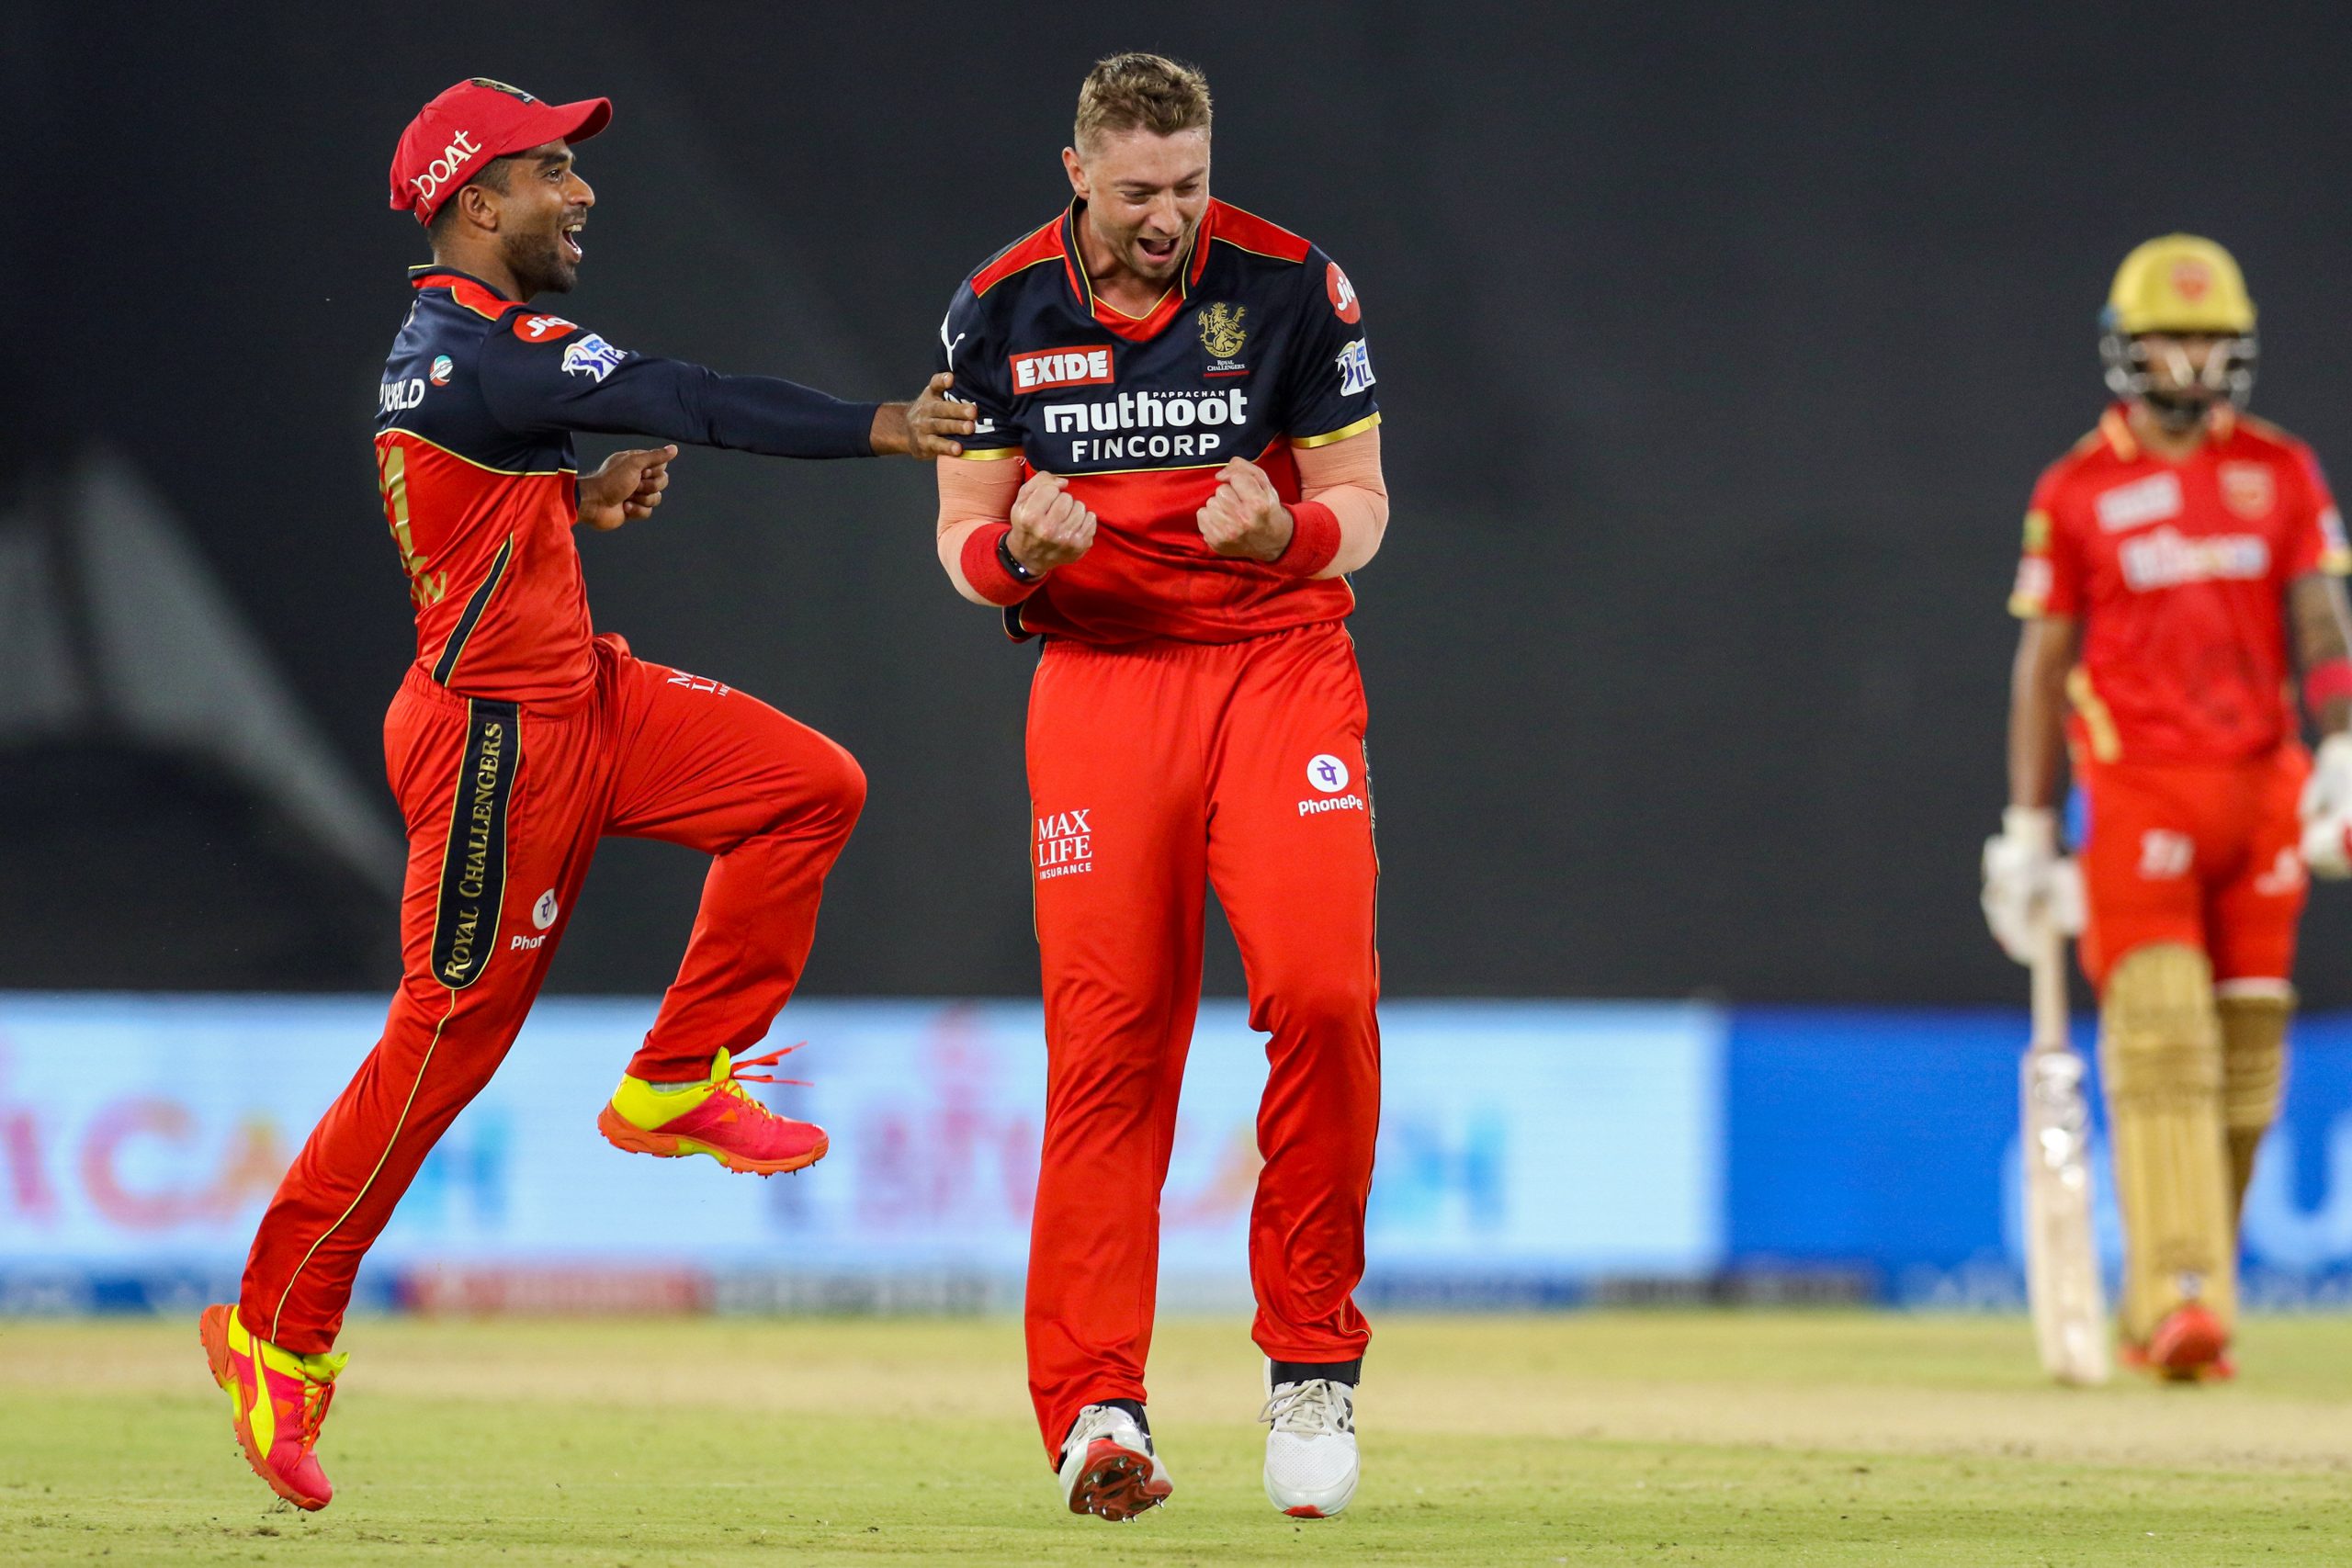 Stakeholders and franchises show unity; prefer COVID fight over IPL